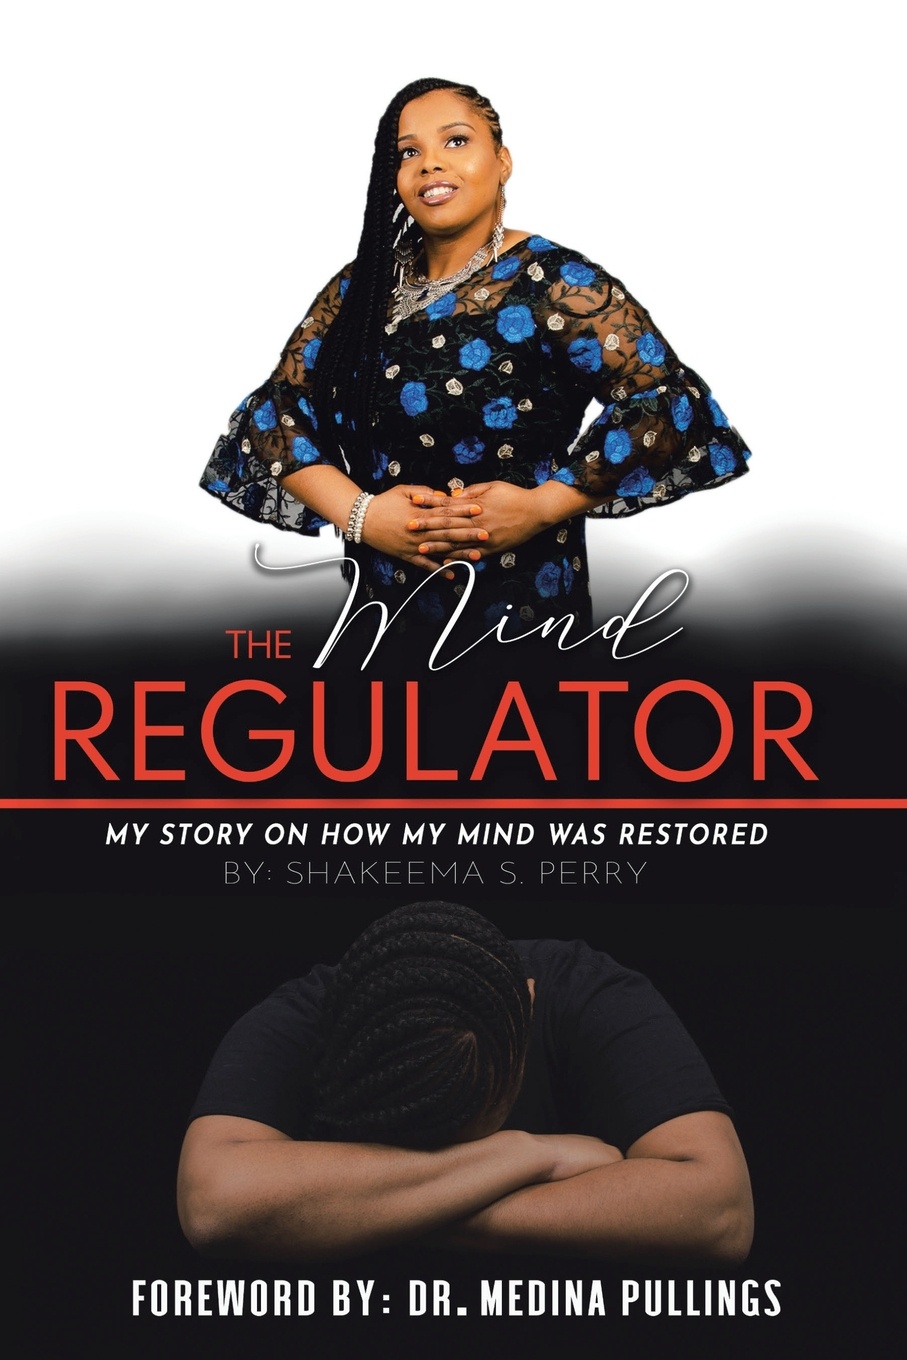 The Mind Regulator. My Story on How My Mind Was Restored